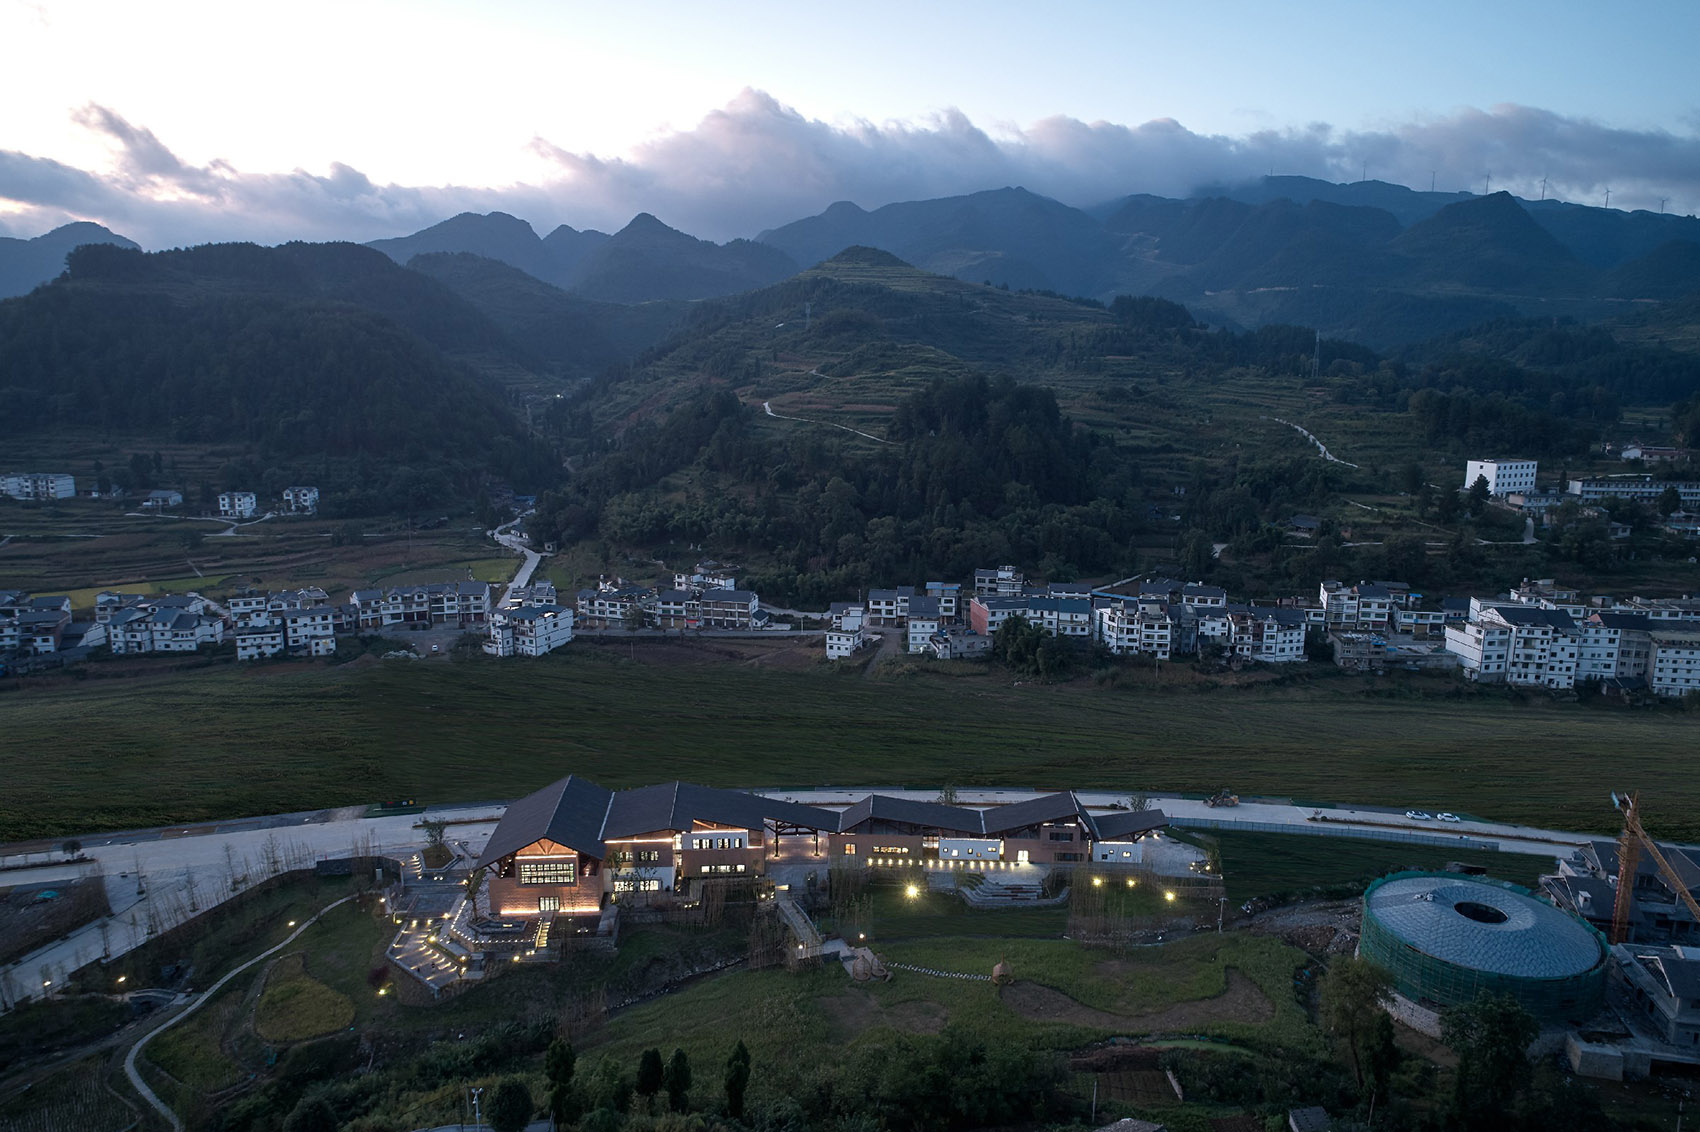 002-guancang-village-centre-china-by-urban-architecture.jpg